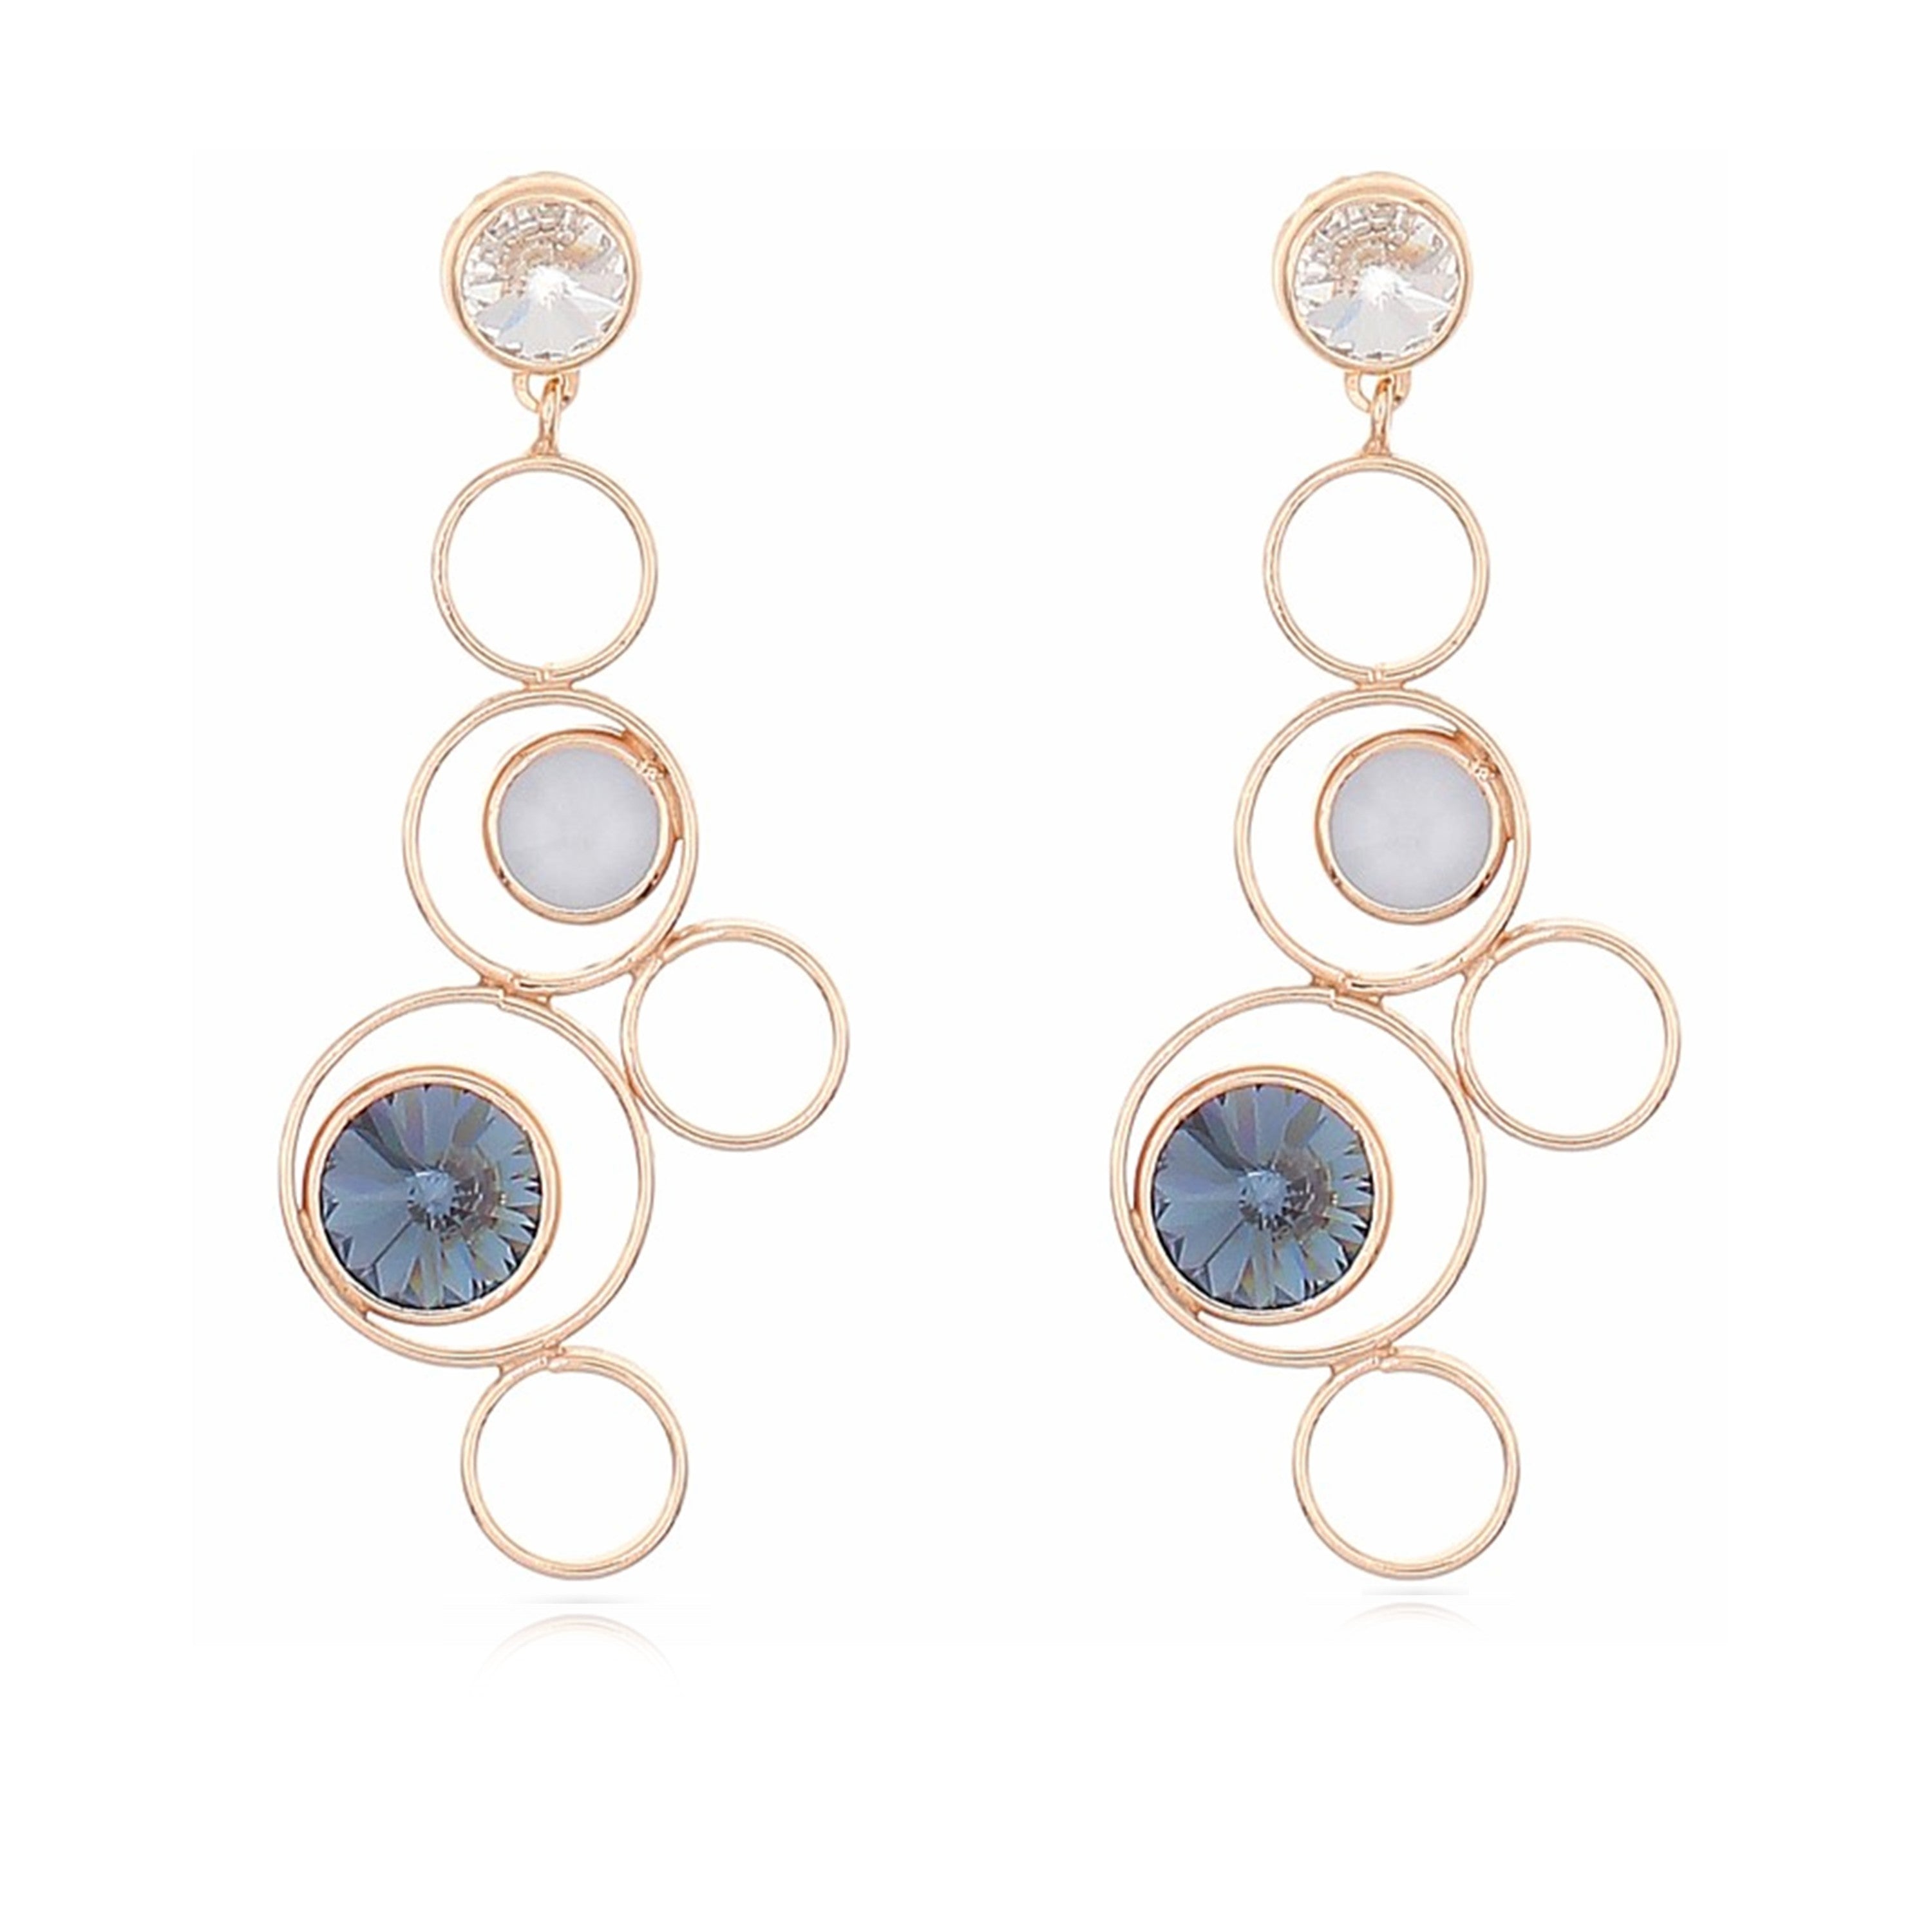 Sterling Silver Gold Statement White & Blue Earrings by Davvero with Crystals from Swarovski®